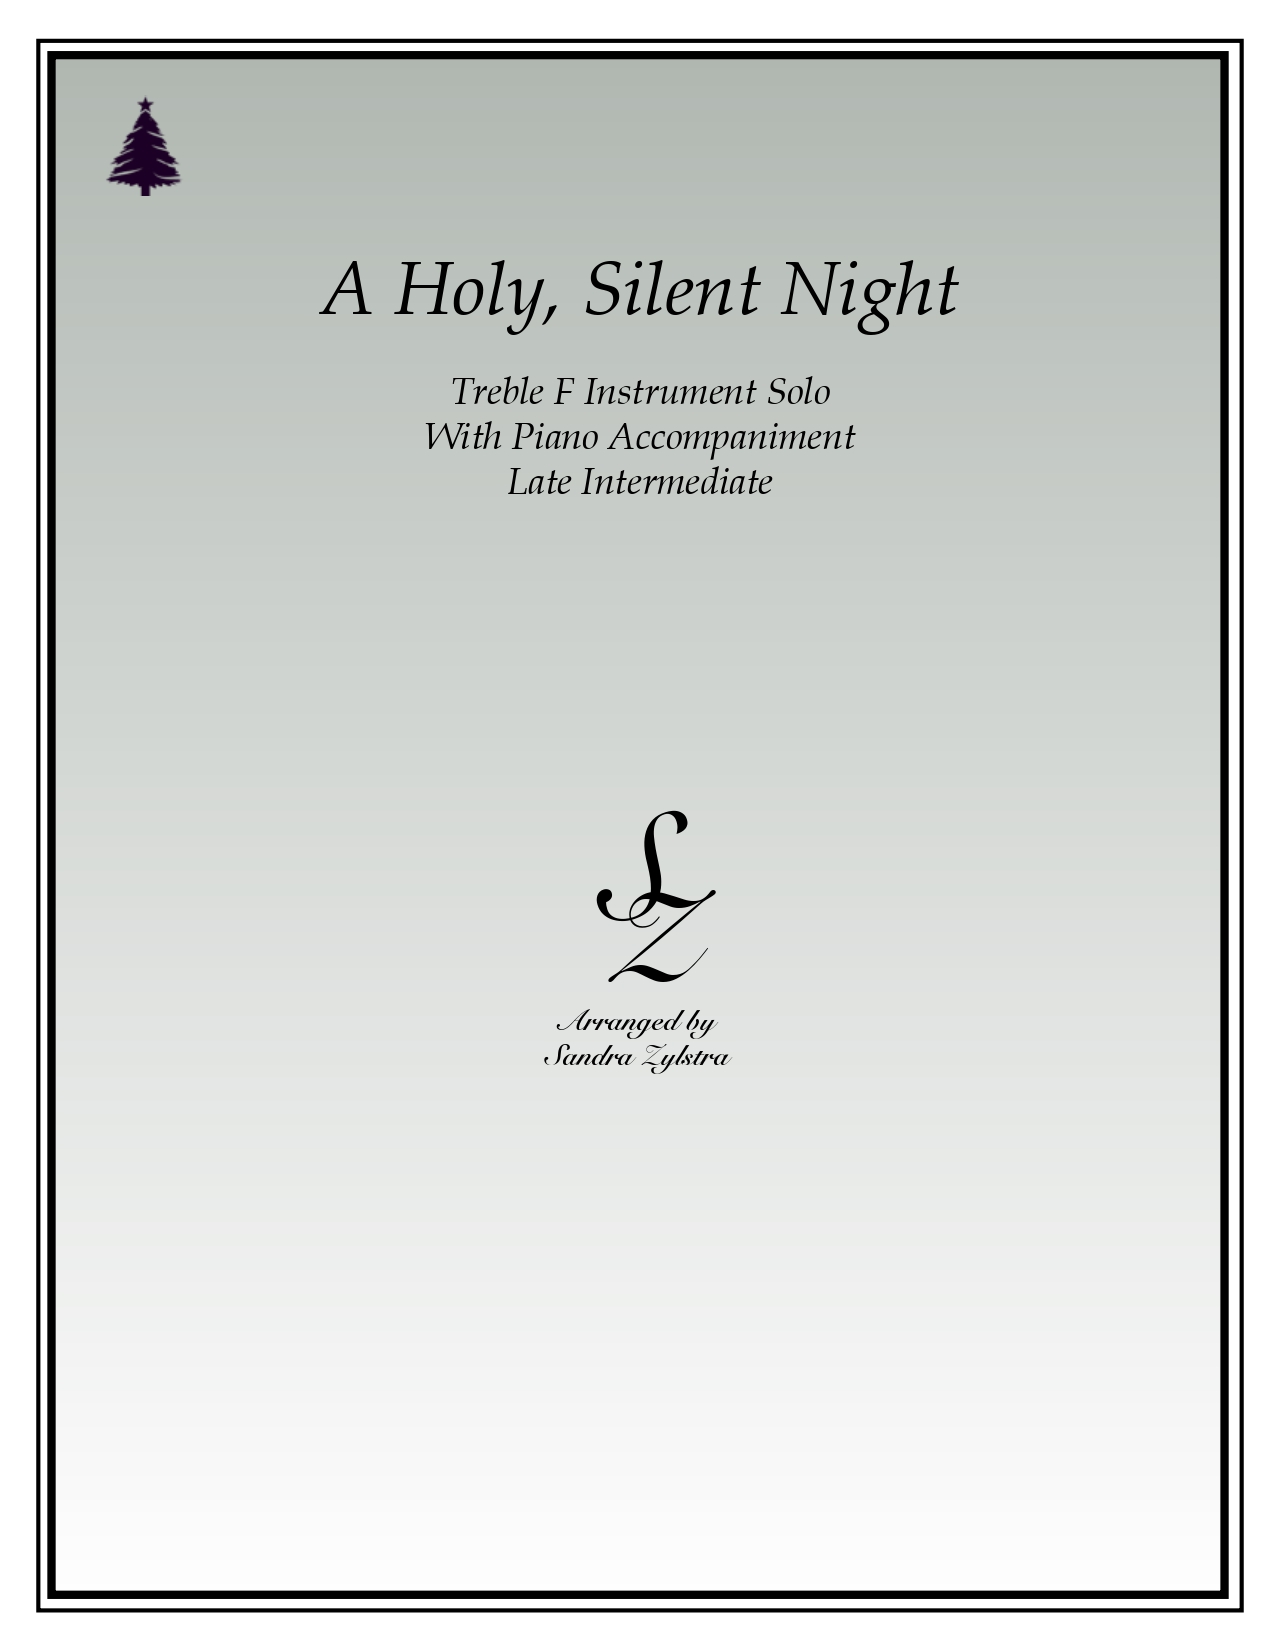 A Holy Silent Night F instrument solo part cover page 00011